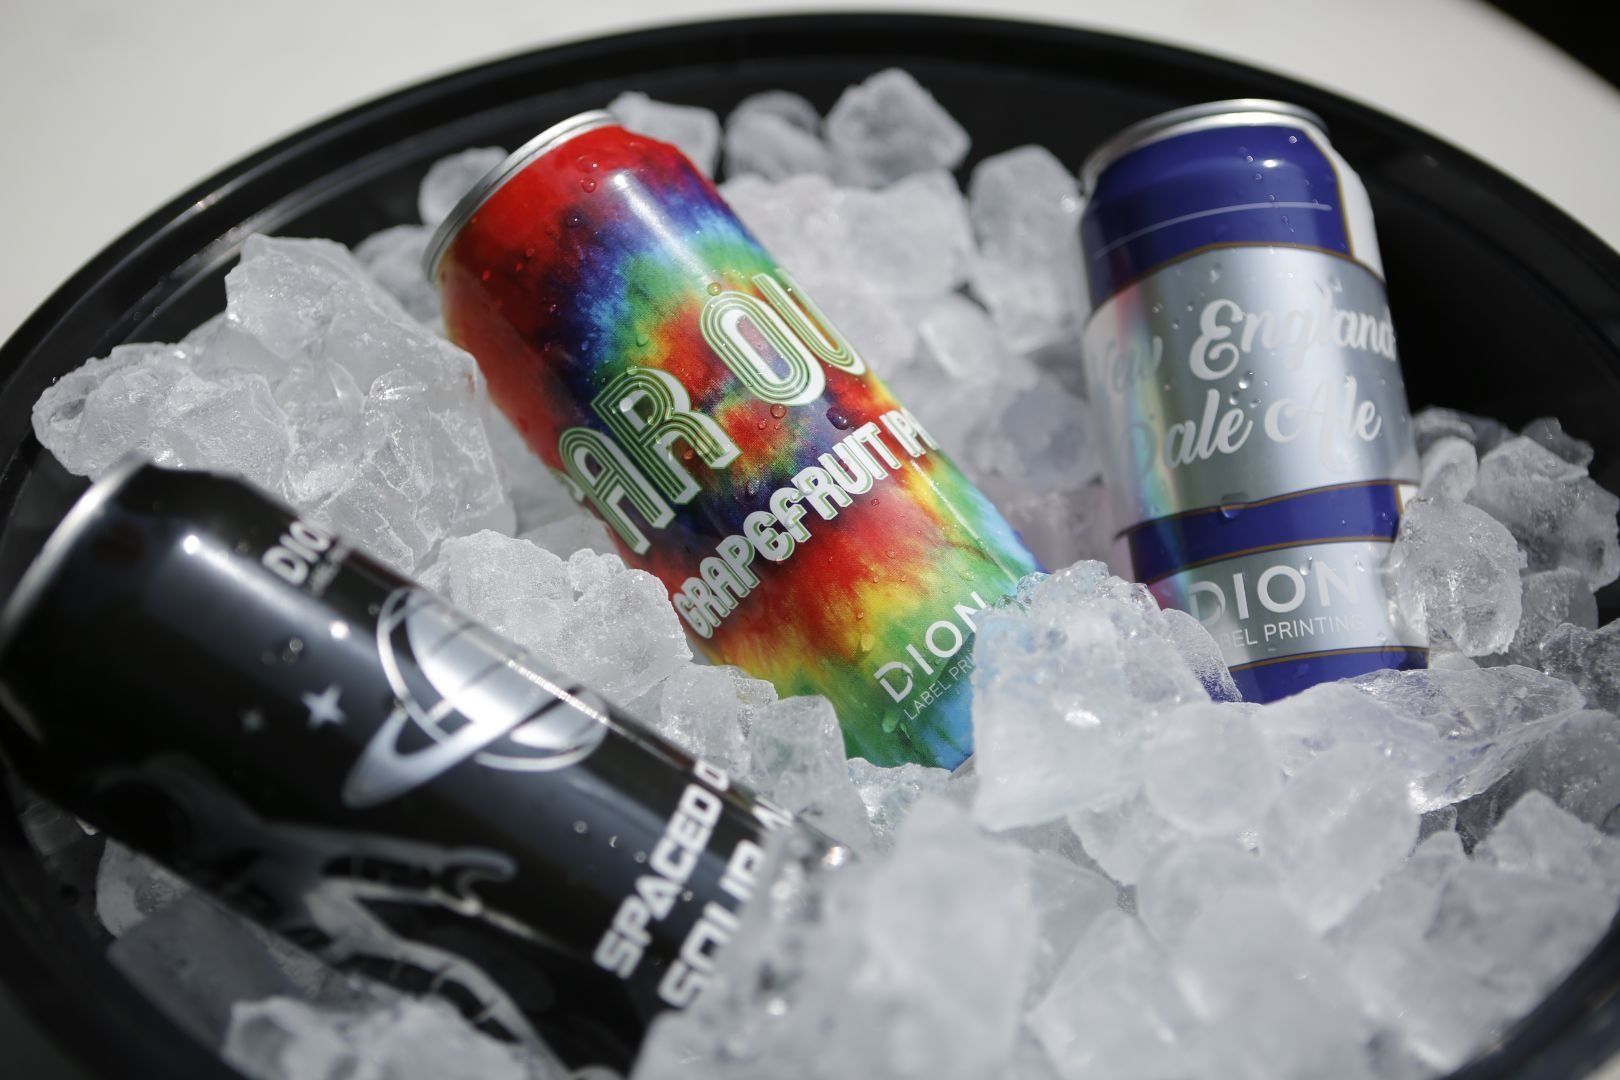 Beer cans with shrink sleeves in ice bucket